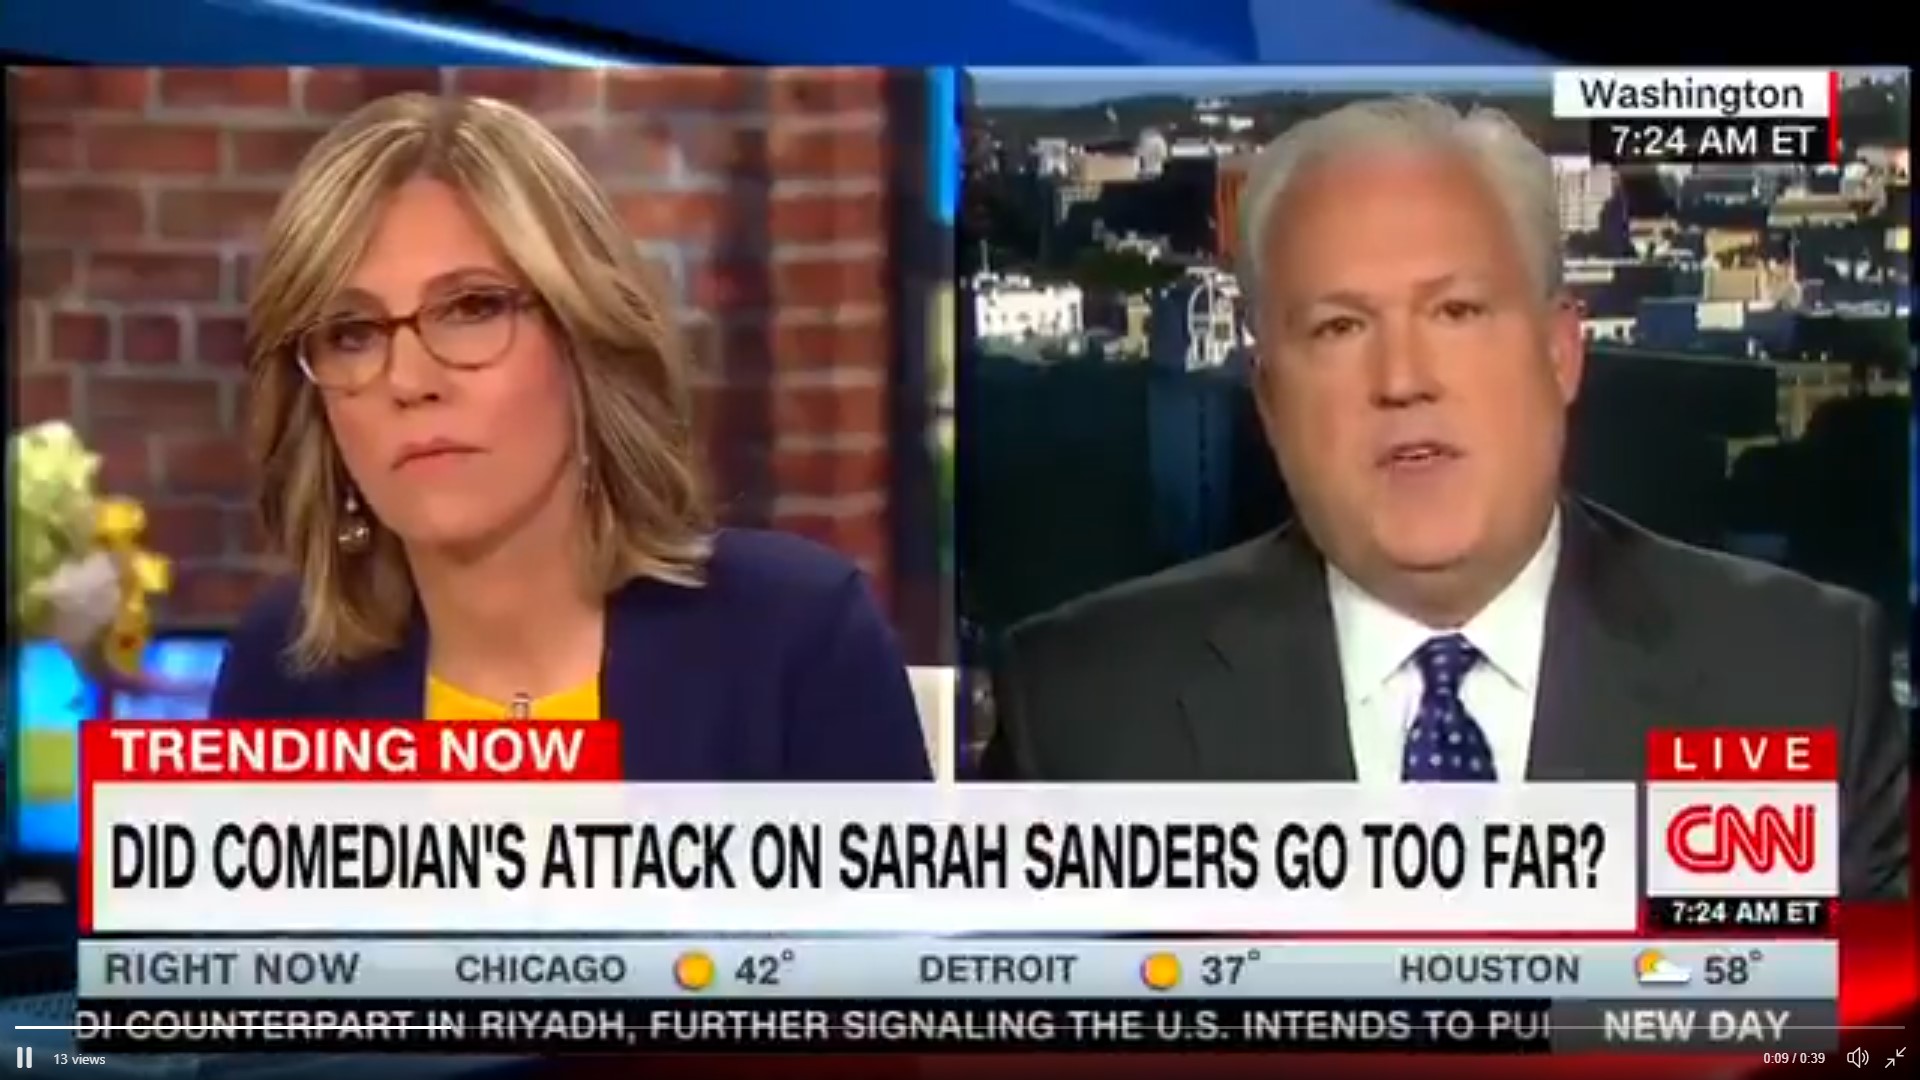 CPAC Organizer Matt Schlapp: Journalists Shouldn’t ‘Say That The President Or His Spokesperson Is Lying’